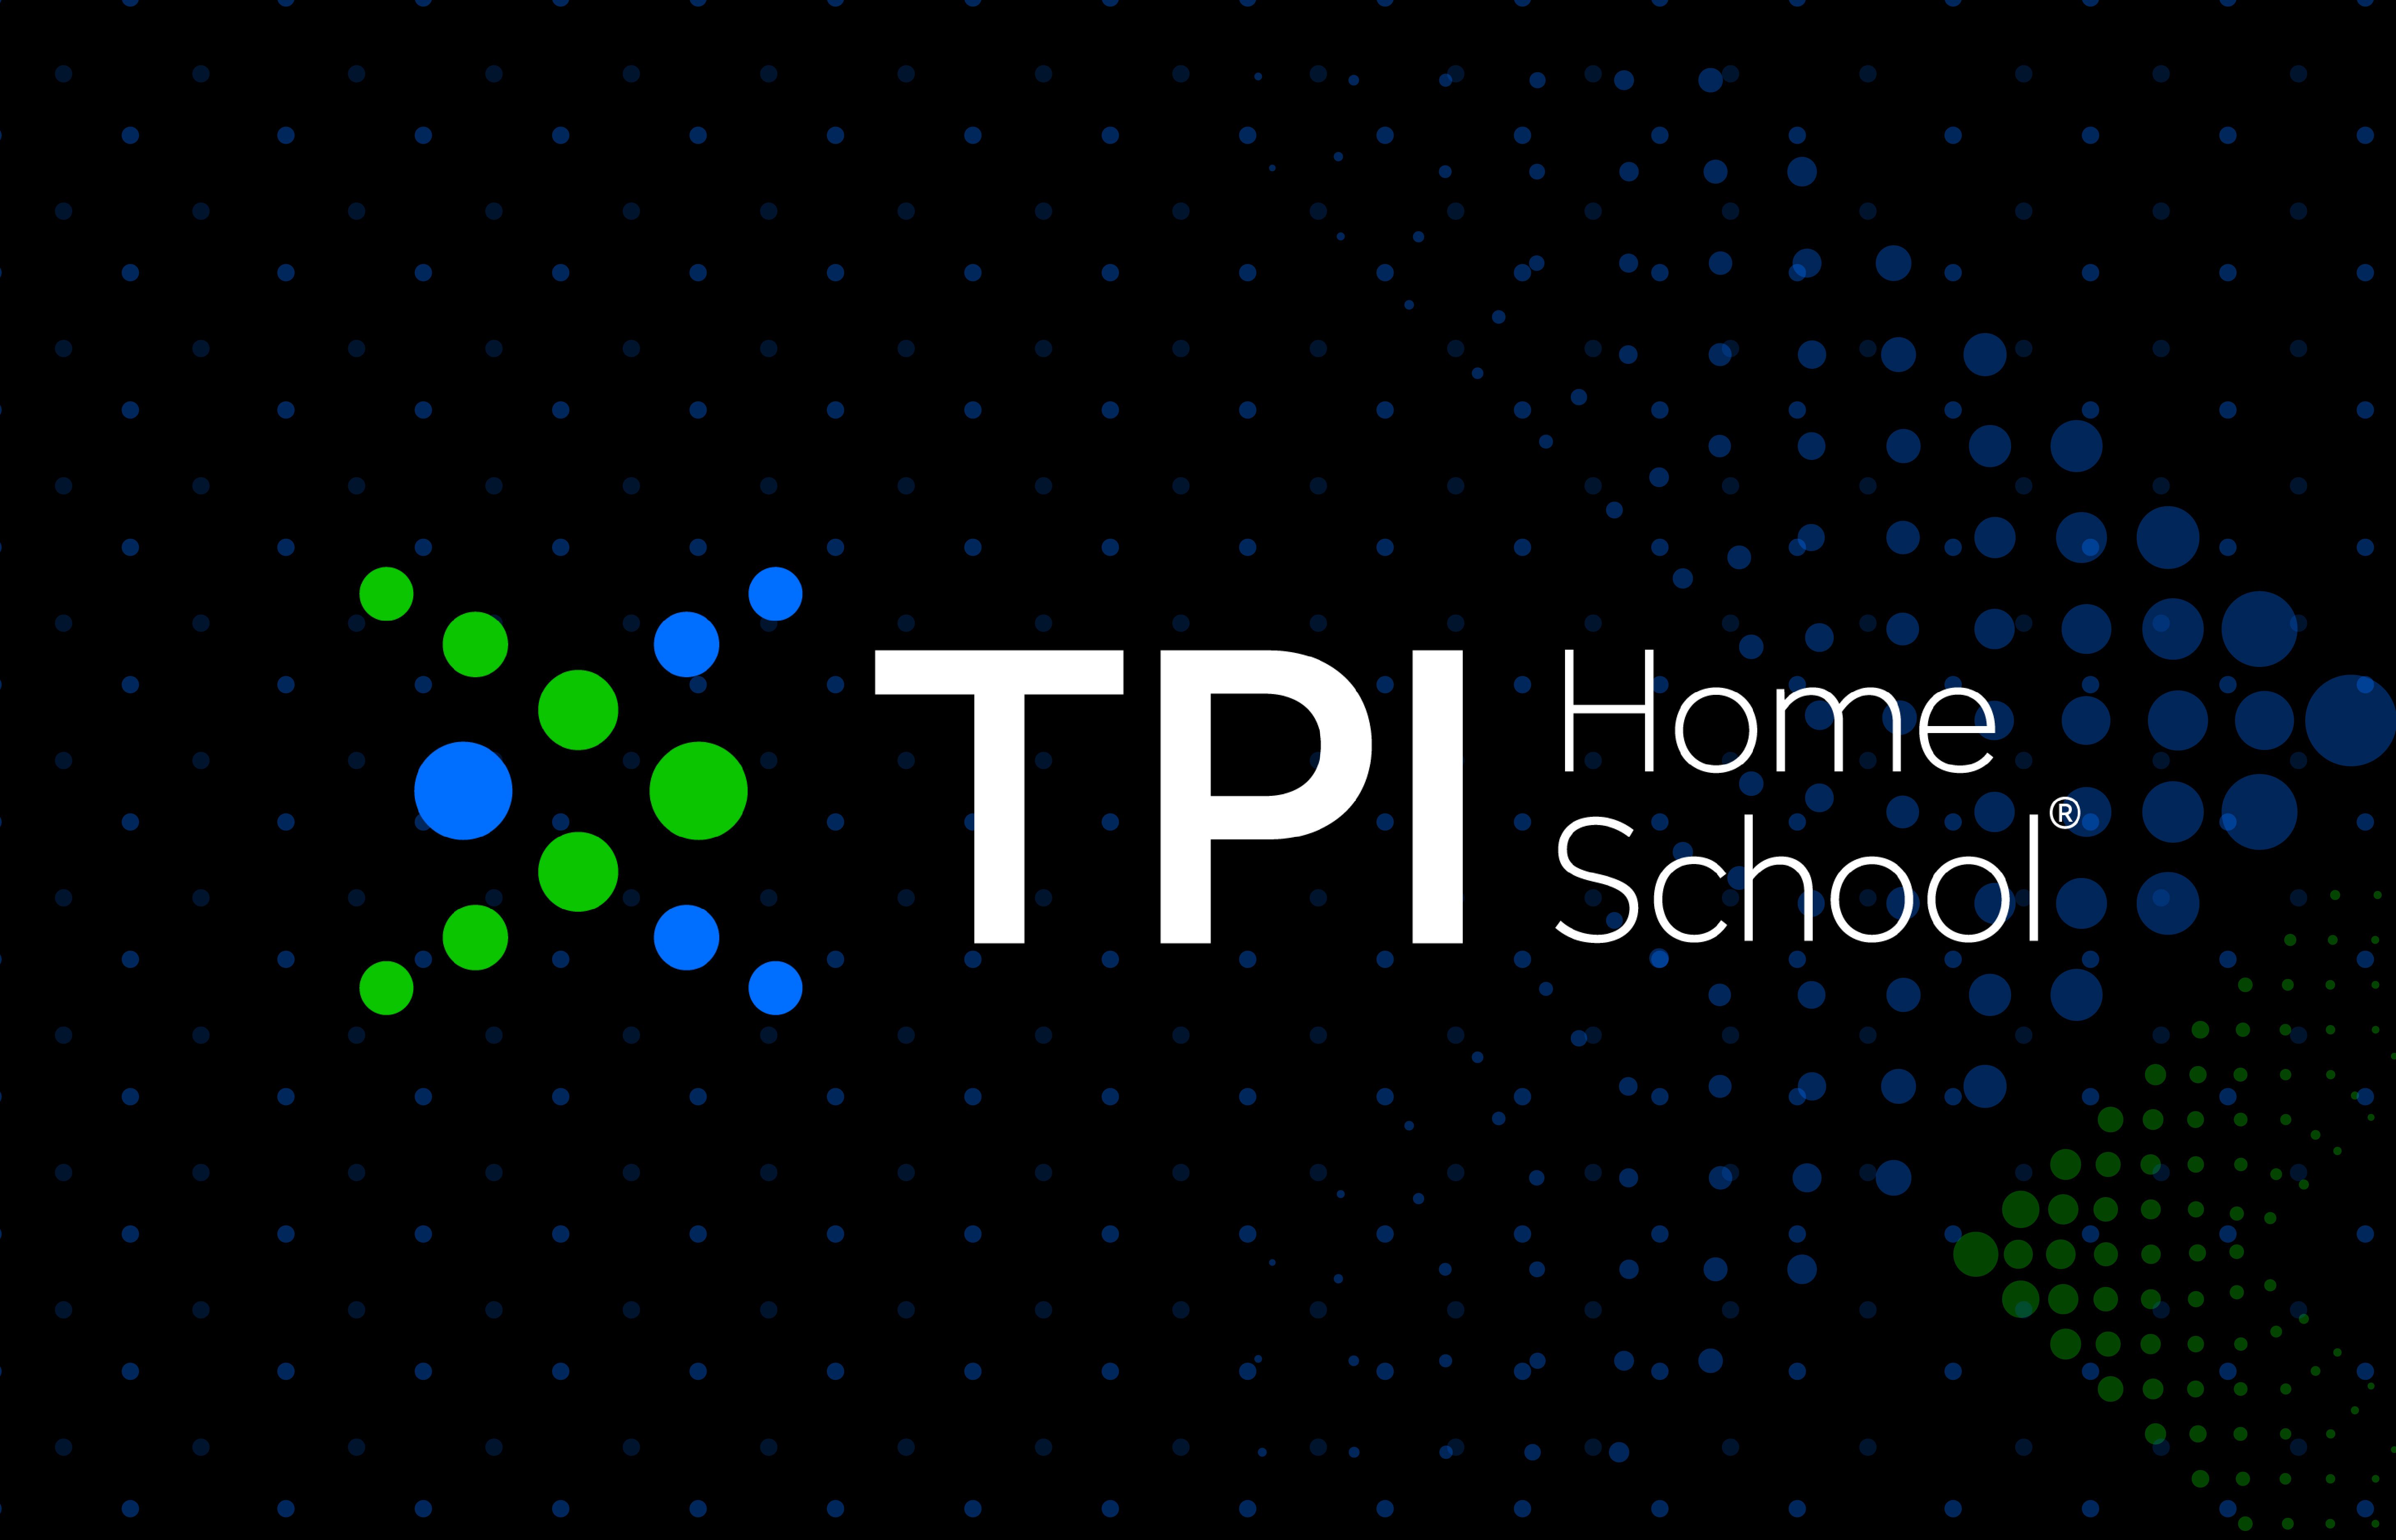 TPI Home School logo with Background 